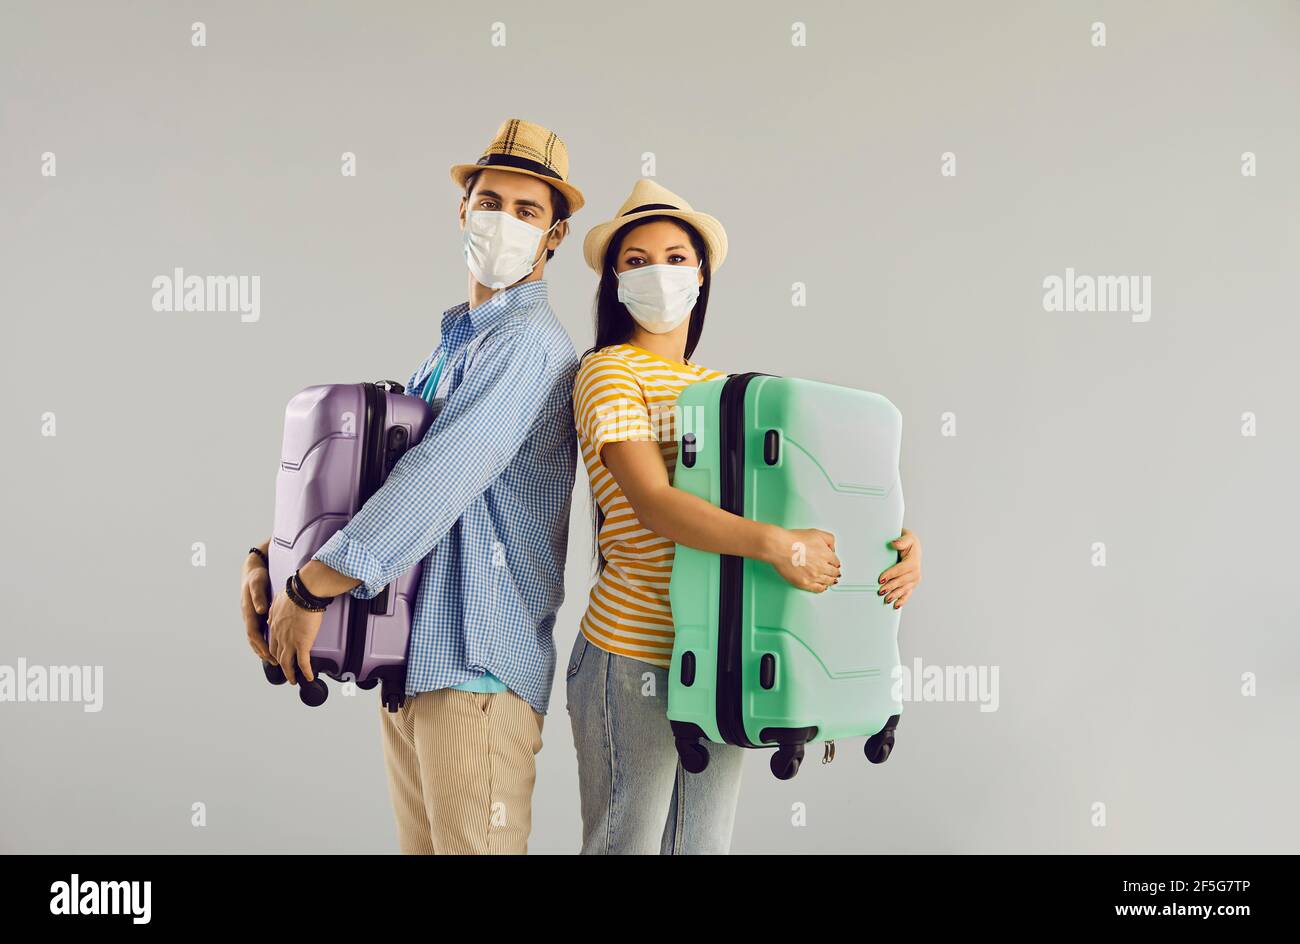 Happy family couple traveler in facial mask with suitcase studio portrait Stock Photo